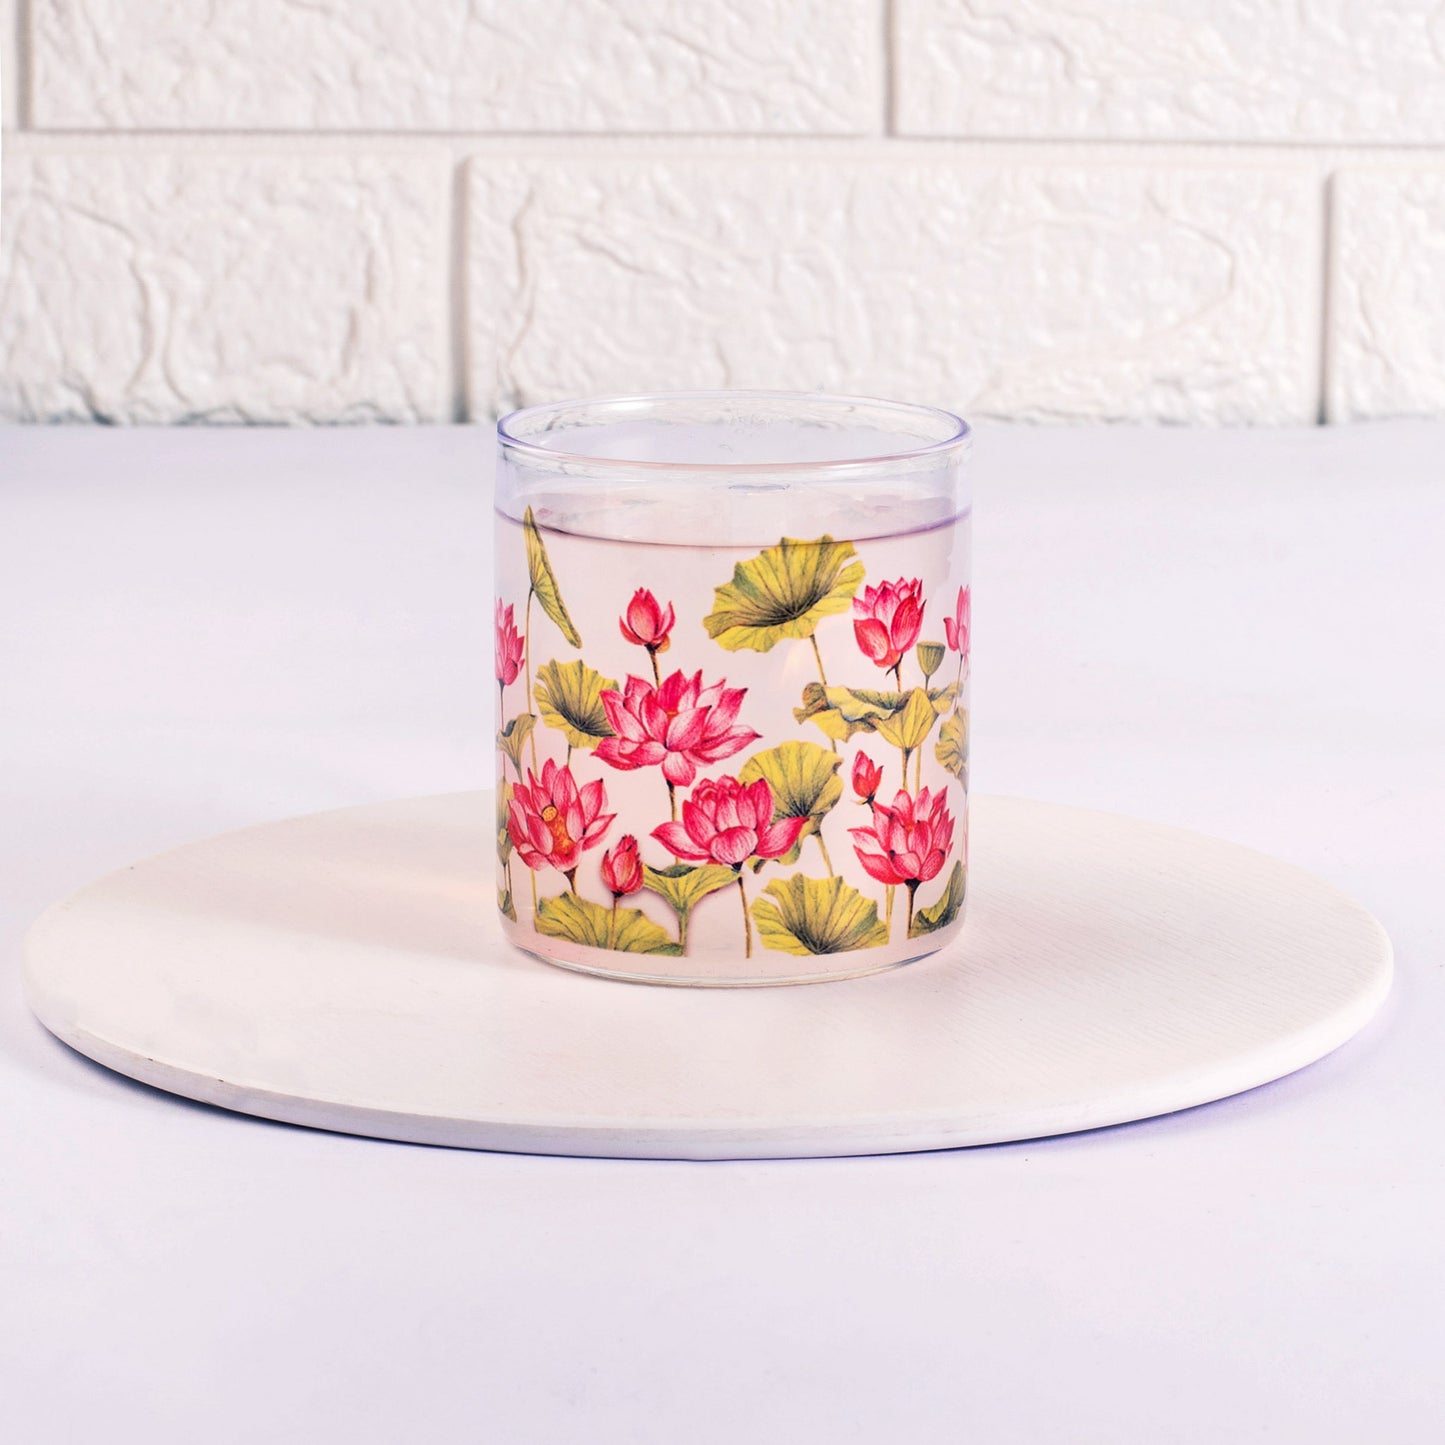 Lotus Field Tea cups - Set of 4 and 6